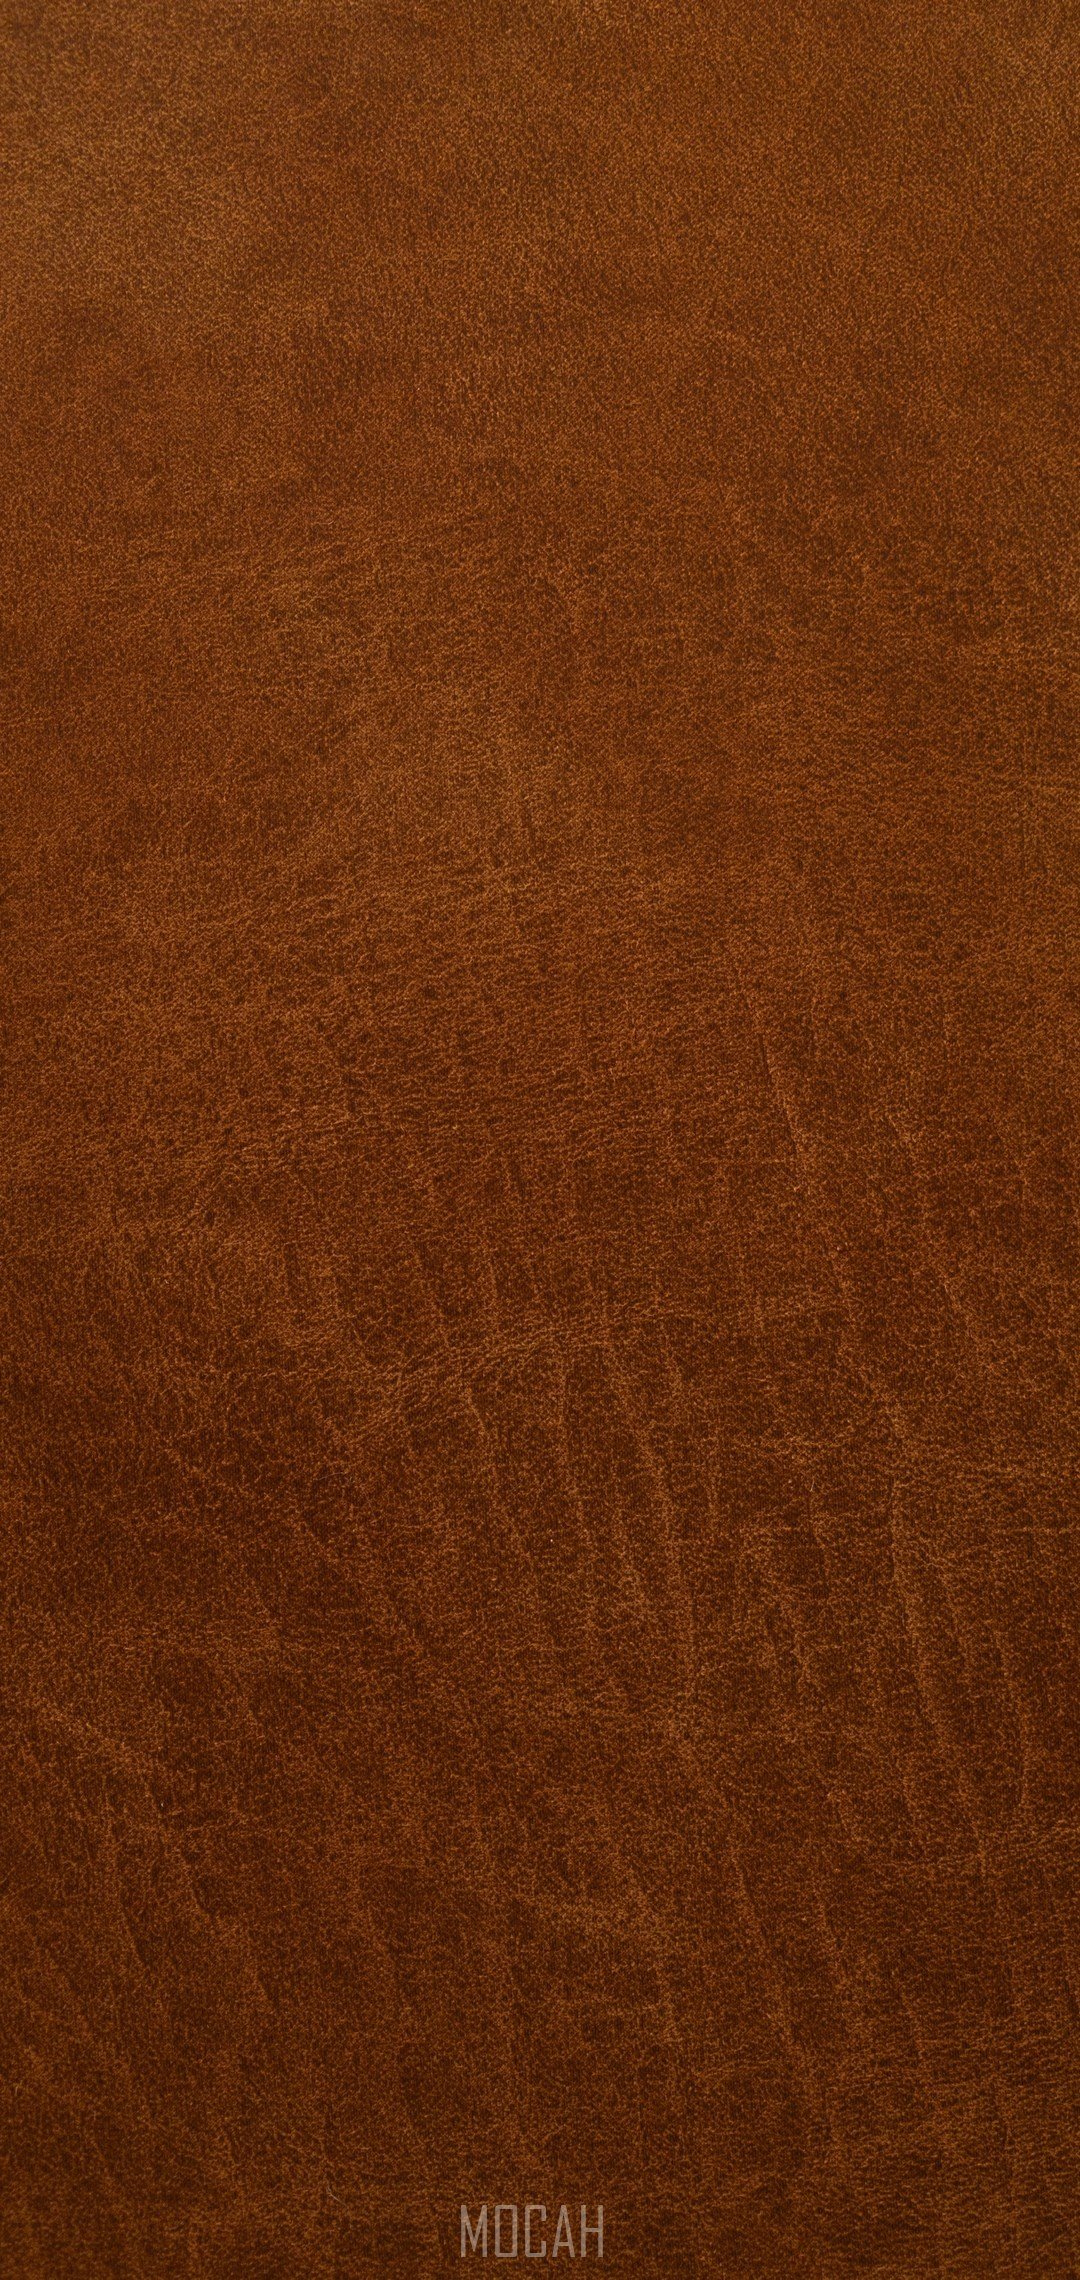 Leather, Brown, Wood, Caramel Color, Plywood, Oppo R15 full HD wallpaper, 1080x2280. Mocah HD Wallpaper